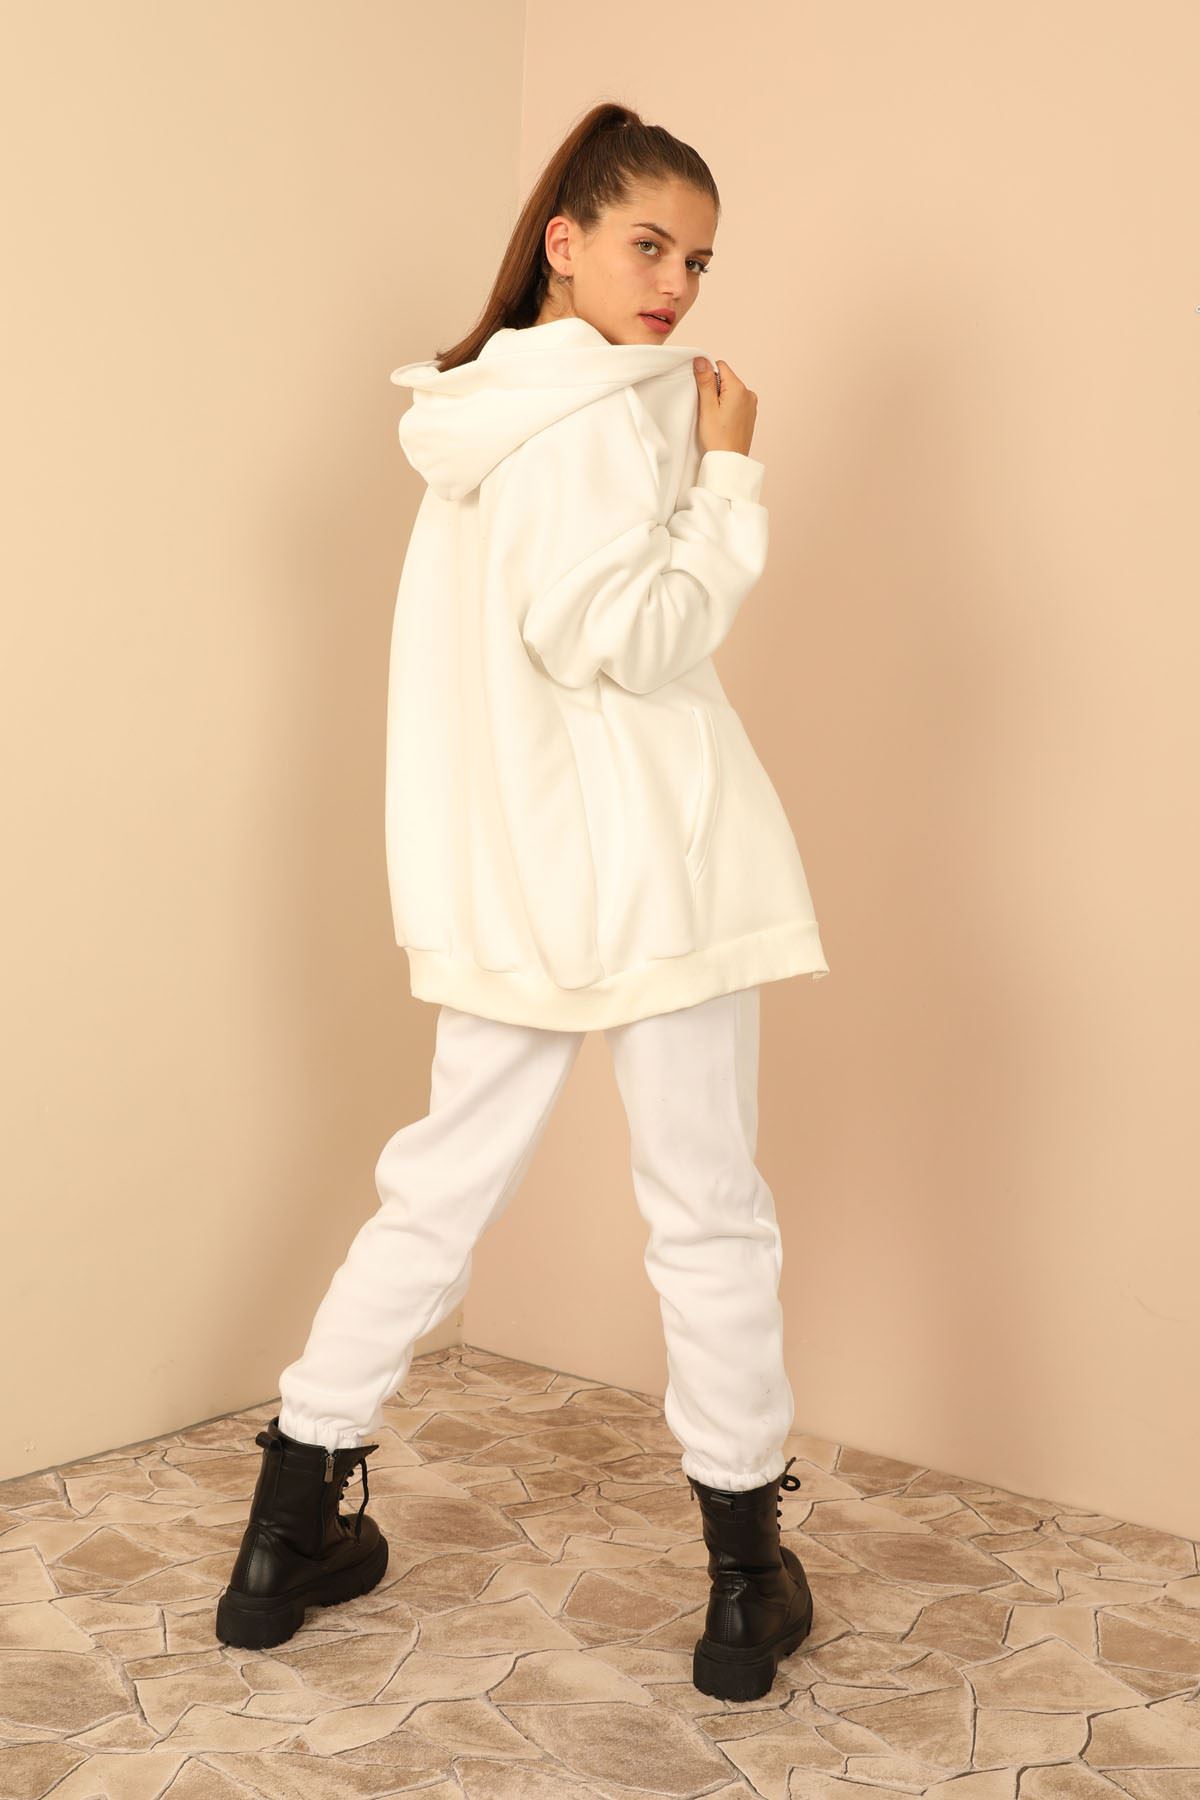 Third Knit With Wool İnside Fabric Hooded Below Hip Oversize Women Sweatshirt With Zip - White